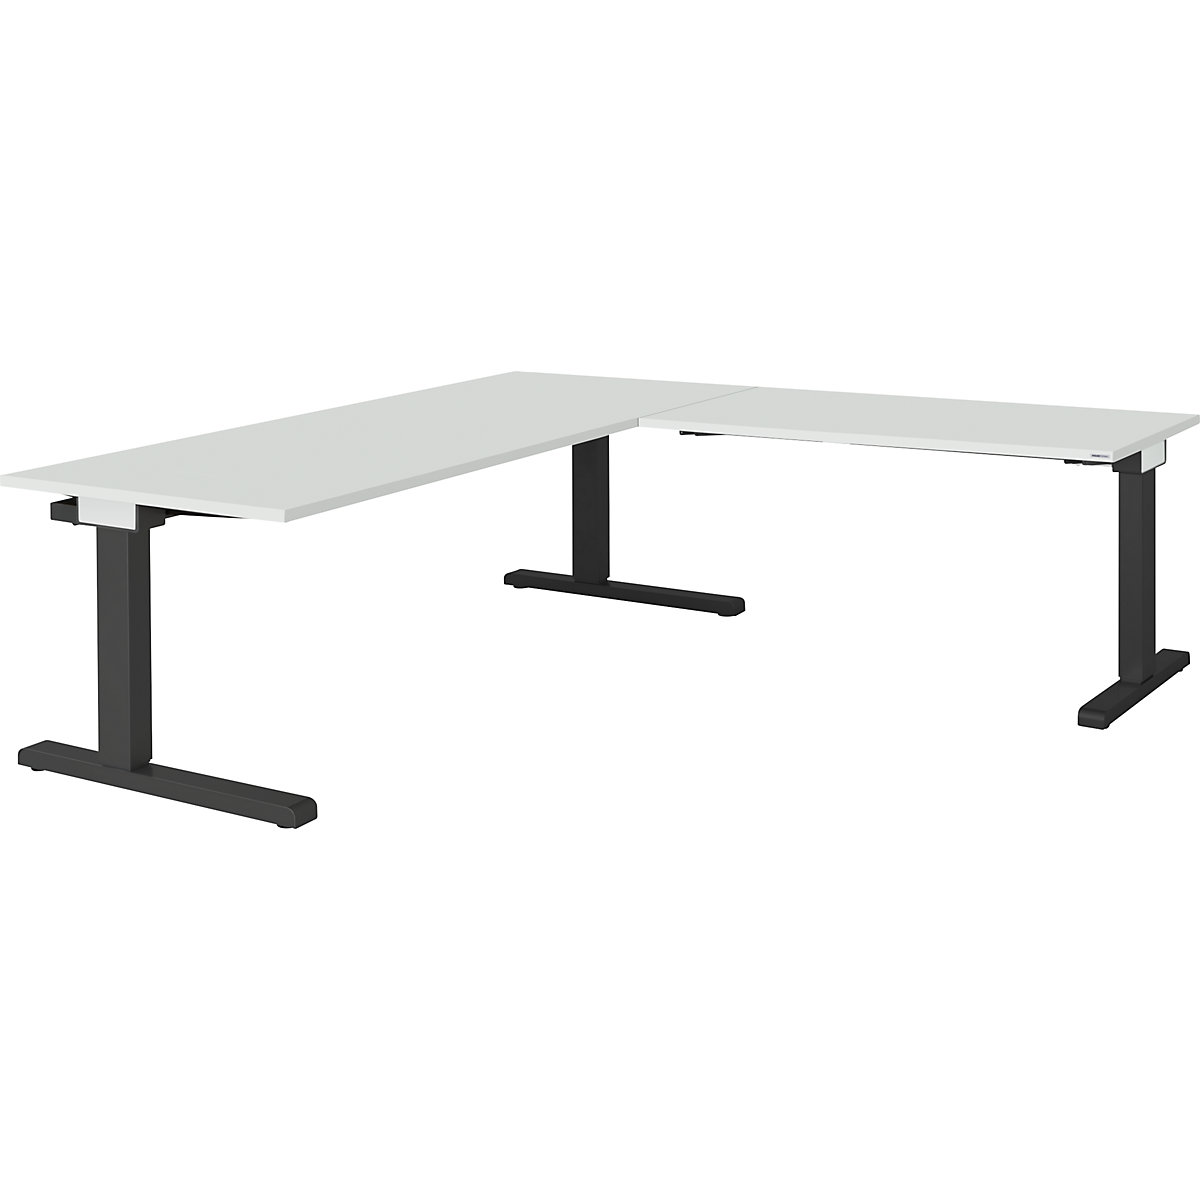 Desk, interlinked – mauser, WxD 1800 x 800 mm, angled extension on right (width 1200 mm), light grey top, charcoal frame-2